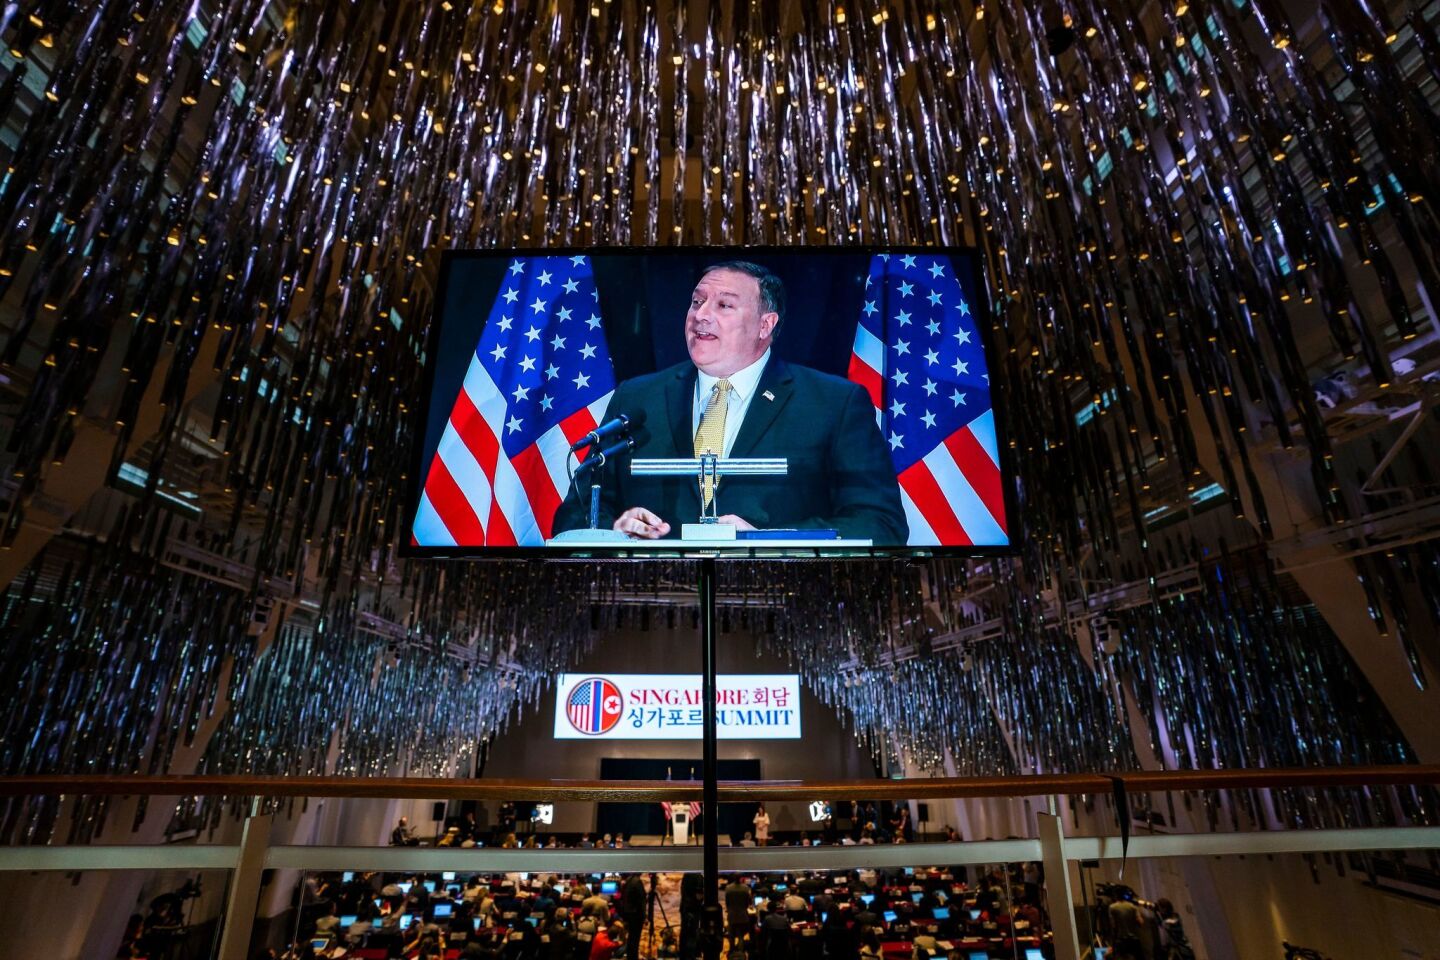 Secretary of State Mike Pompeo is seen in a television monitor as he speaks to the media about the upcoming meeting between U.S. President Donald J. Trump and North Korean leader Kim Jong Un in the J.W. Marriott in Singapore on Monday, June 11, 2018.